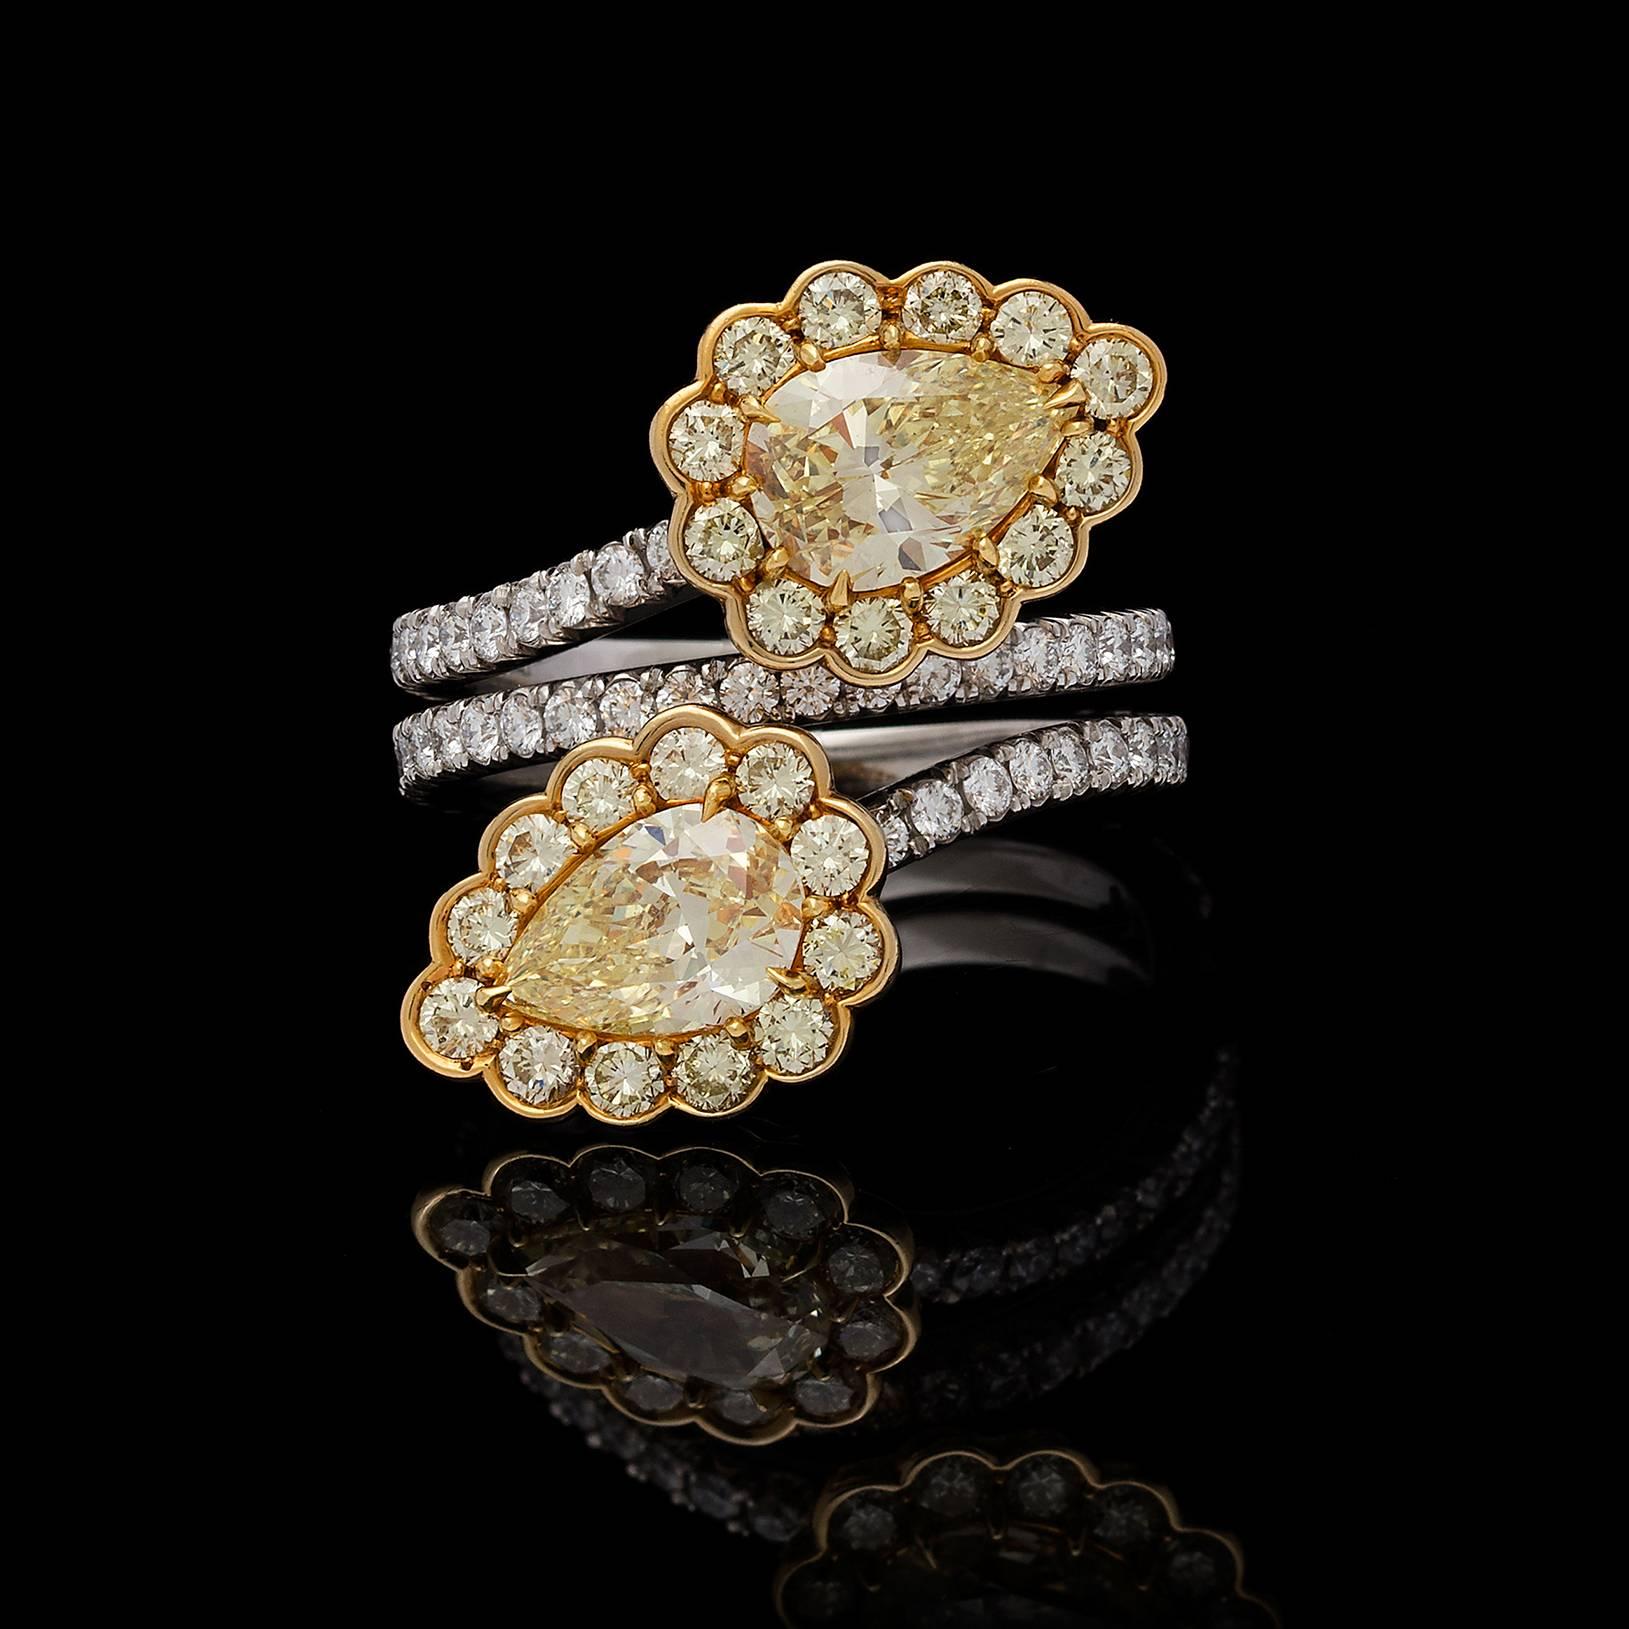 The platinum and 18k yellow gold ring features two GIA fancy light yellow pear-shaped diamonds, weighing 1.15 and 1.01 carats, each framed by yellow round brilliant-cut diamonds, with near colorless round brilliant-cut diamond-set mount. Total